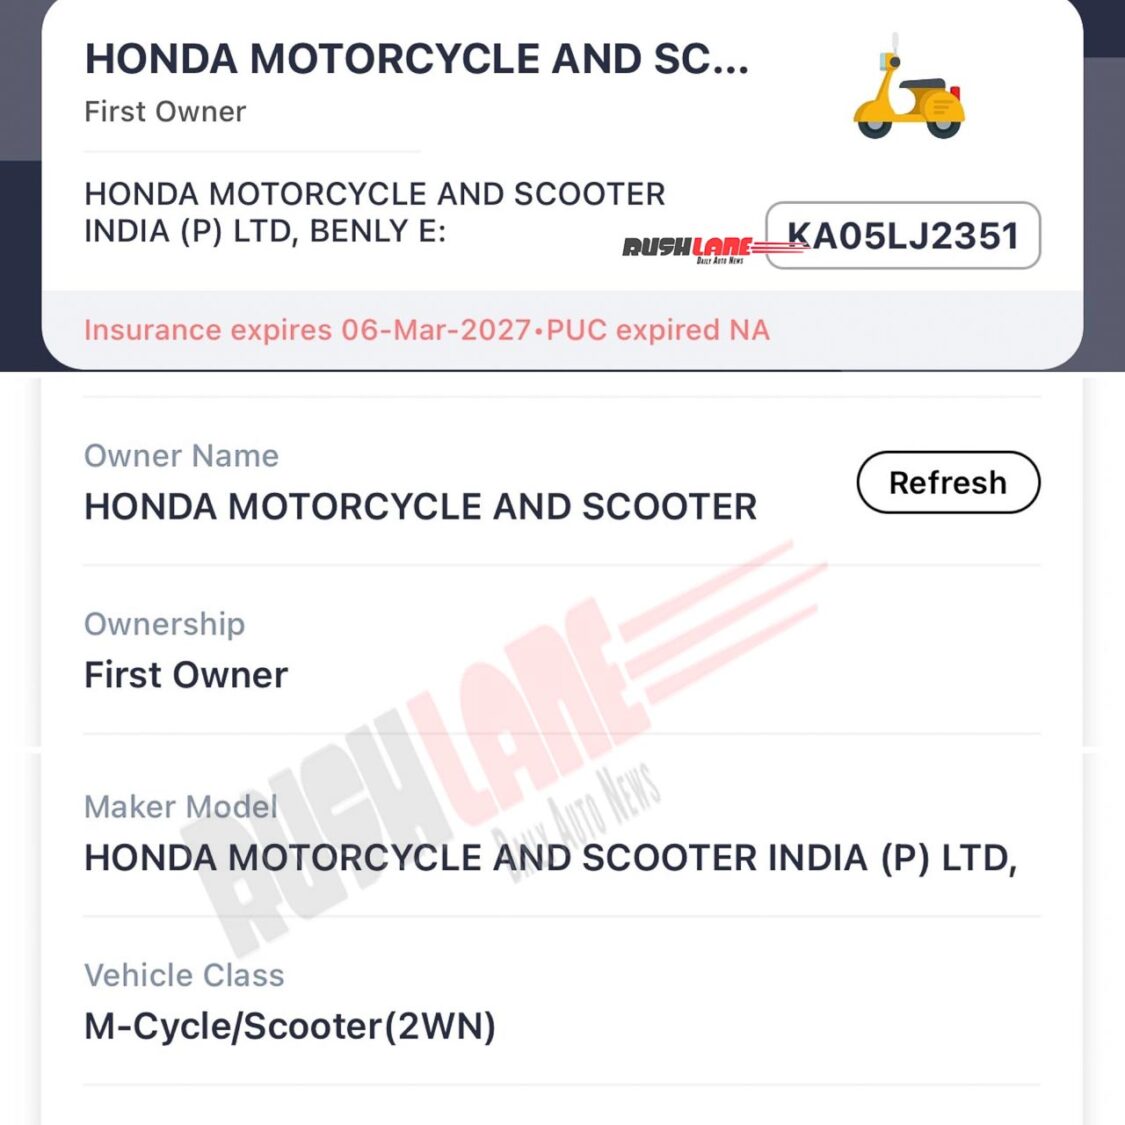 Honda Benly e Electric scooter spied, is owned by Honda Motorcycle And Scooter India